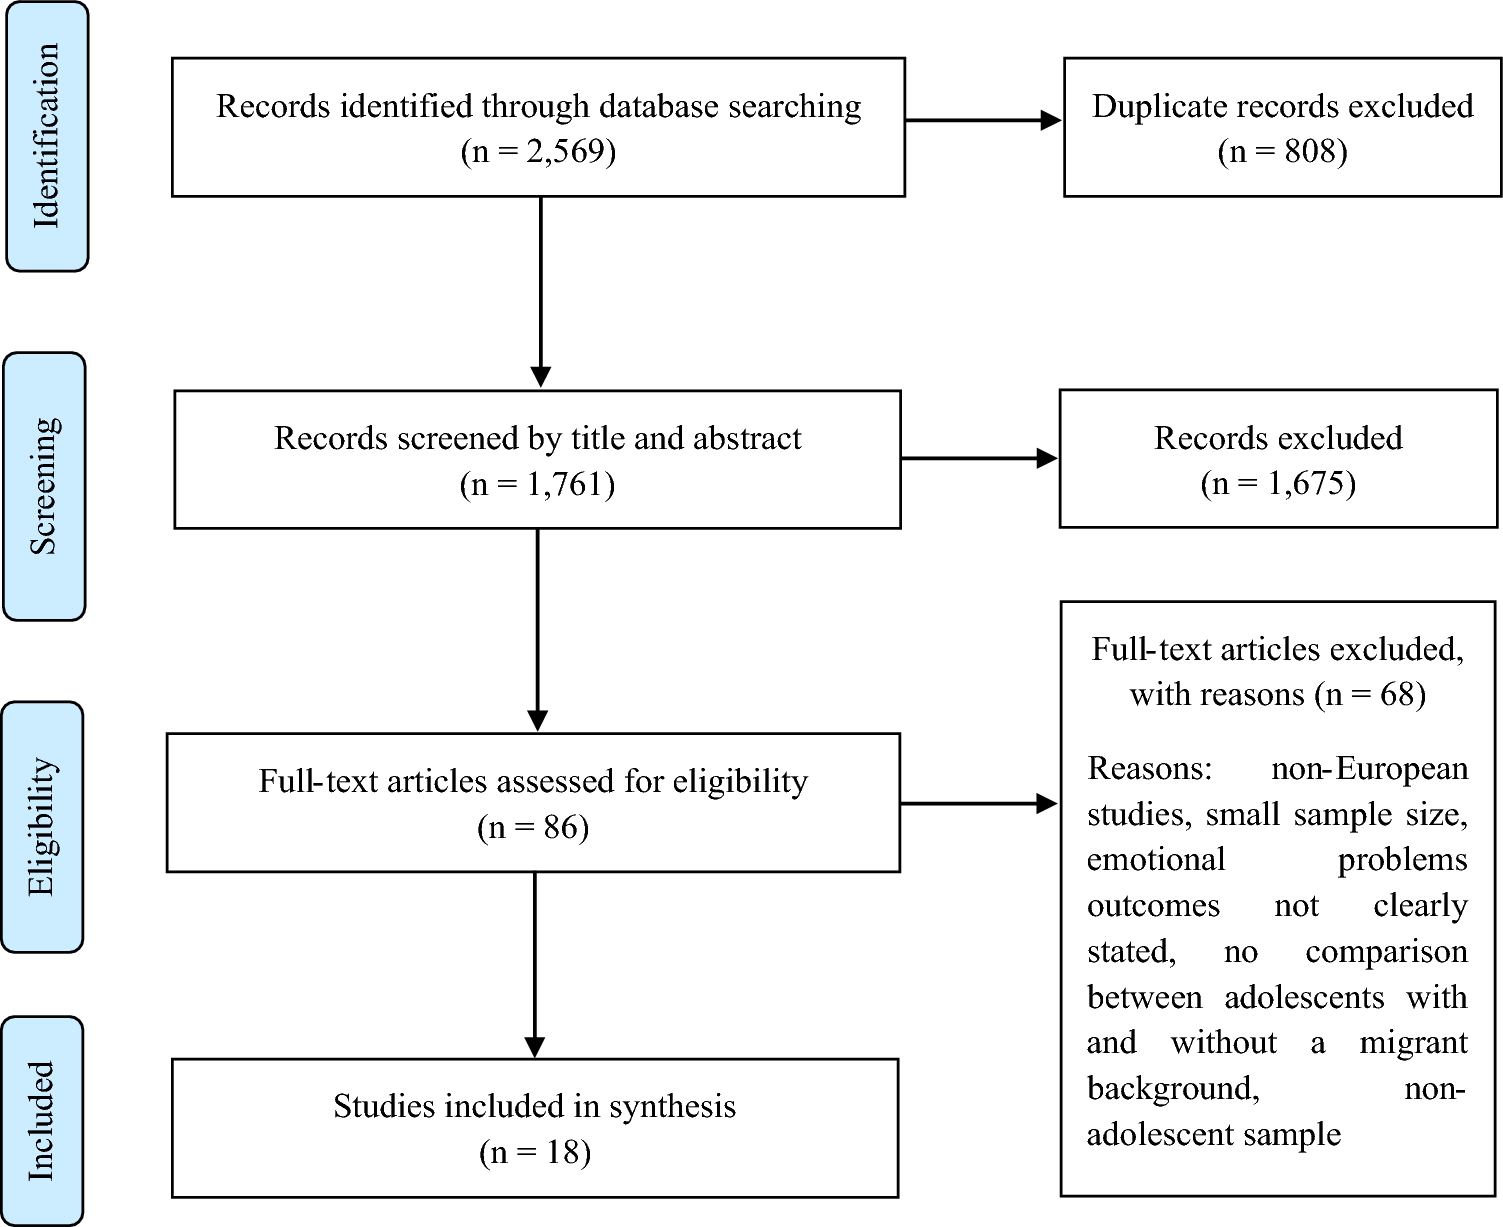 Emotional and relational problems of adolescents with and without a migrant background in Europe: a systematic review